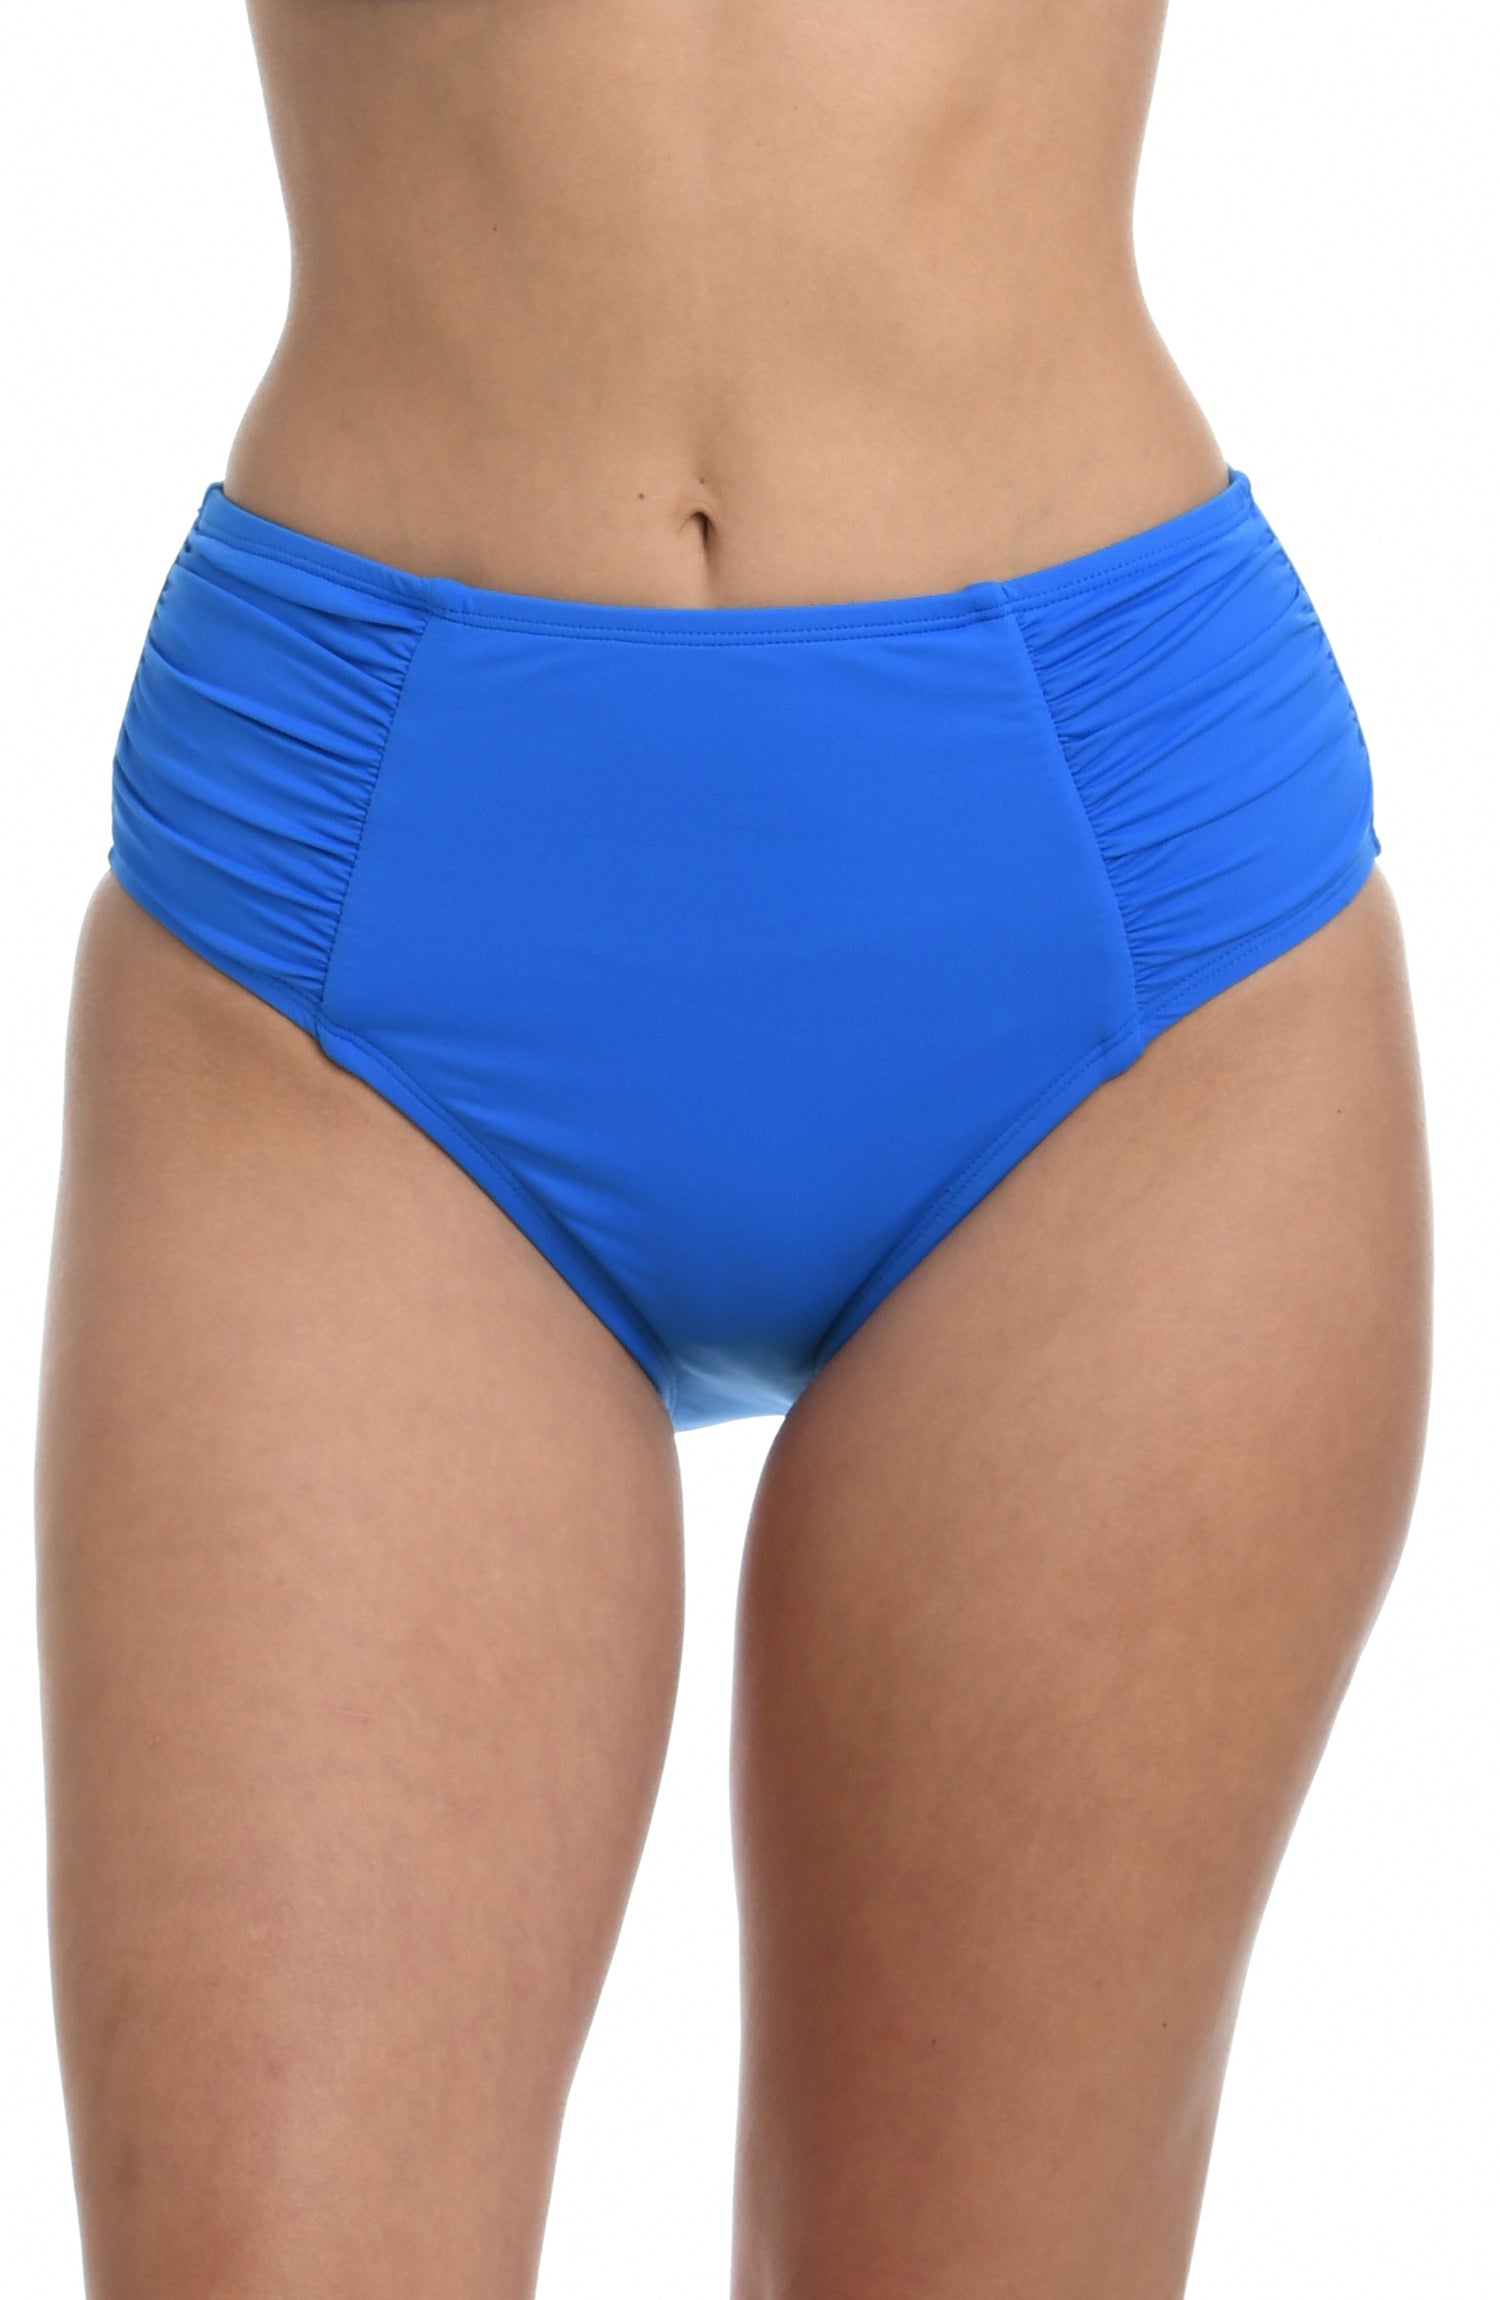 Model is wearing a capri blue colored high waist swimsuit bottom from our Best-Selling Island Goddess collection.